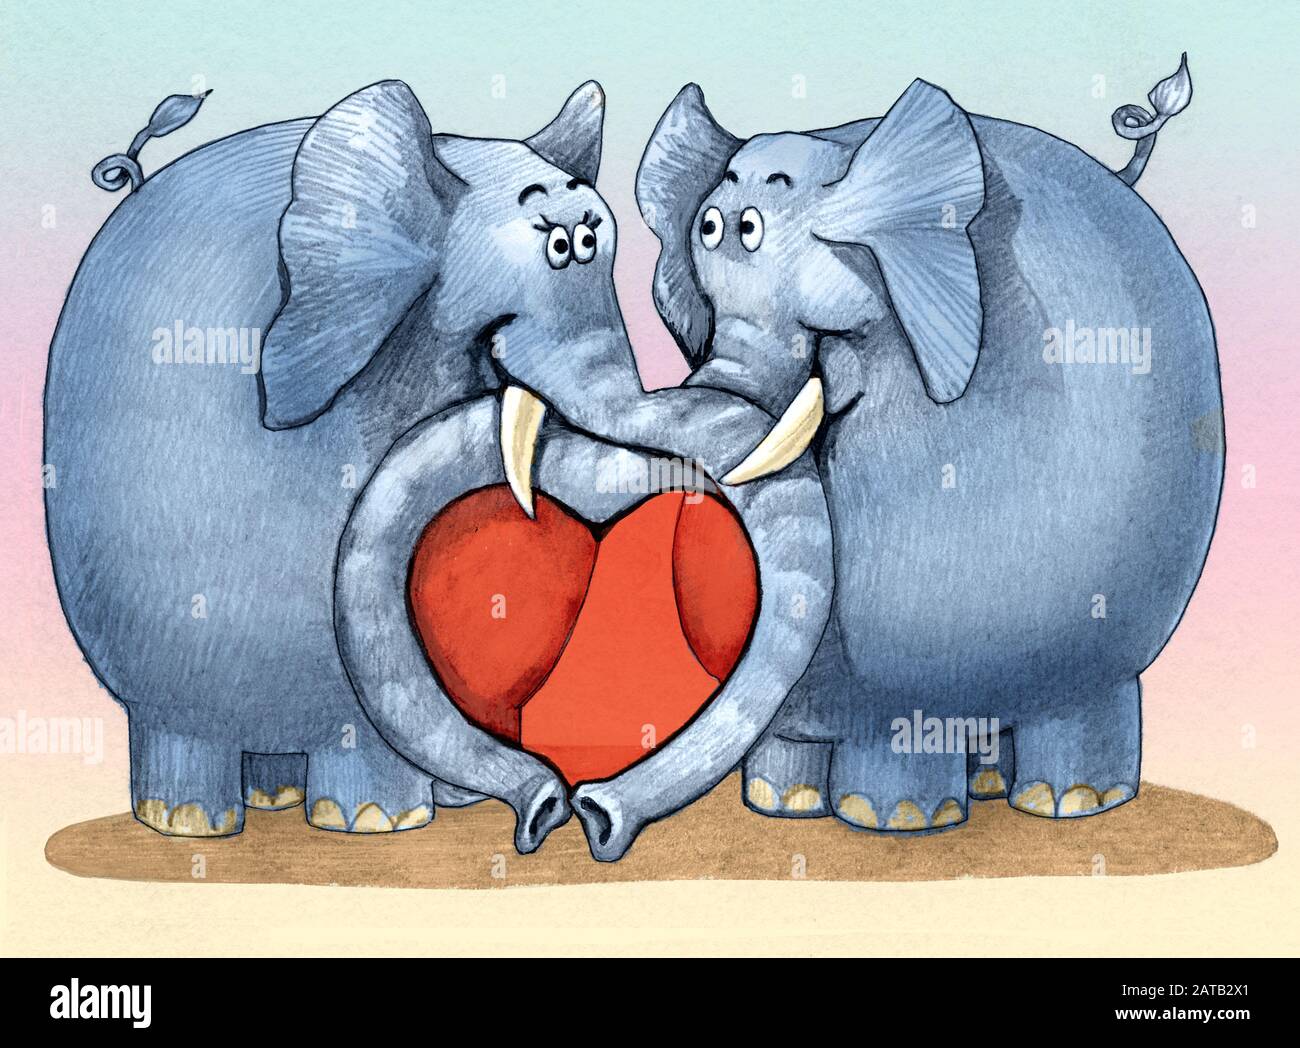 elephants cross proboscis and form a heart have eyes in love have eyes in love romantic fun illustration Stock Photo